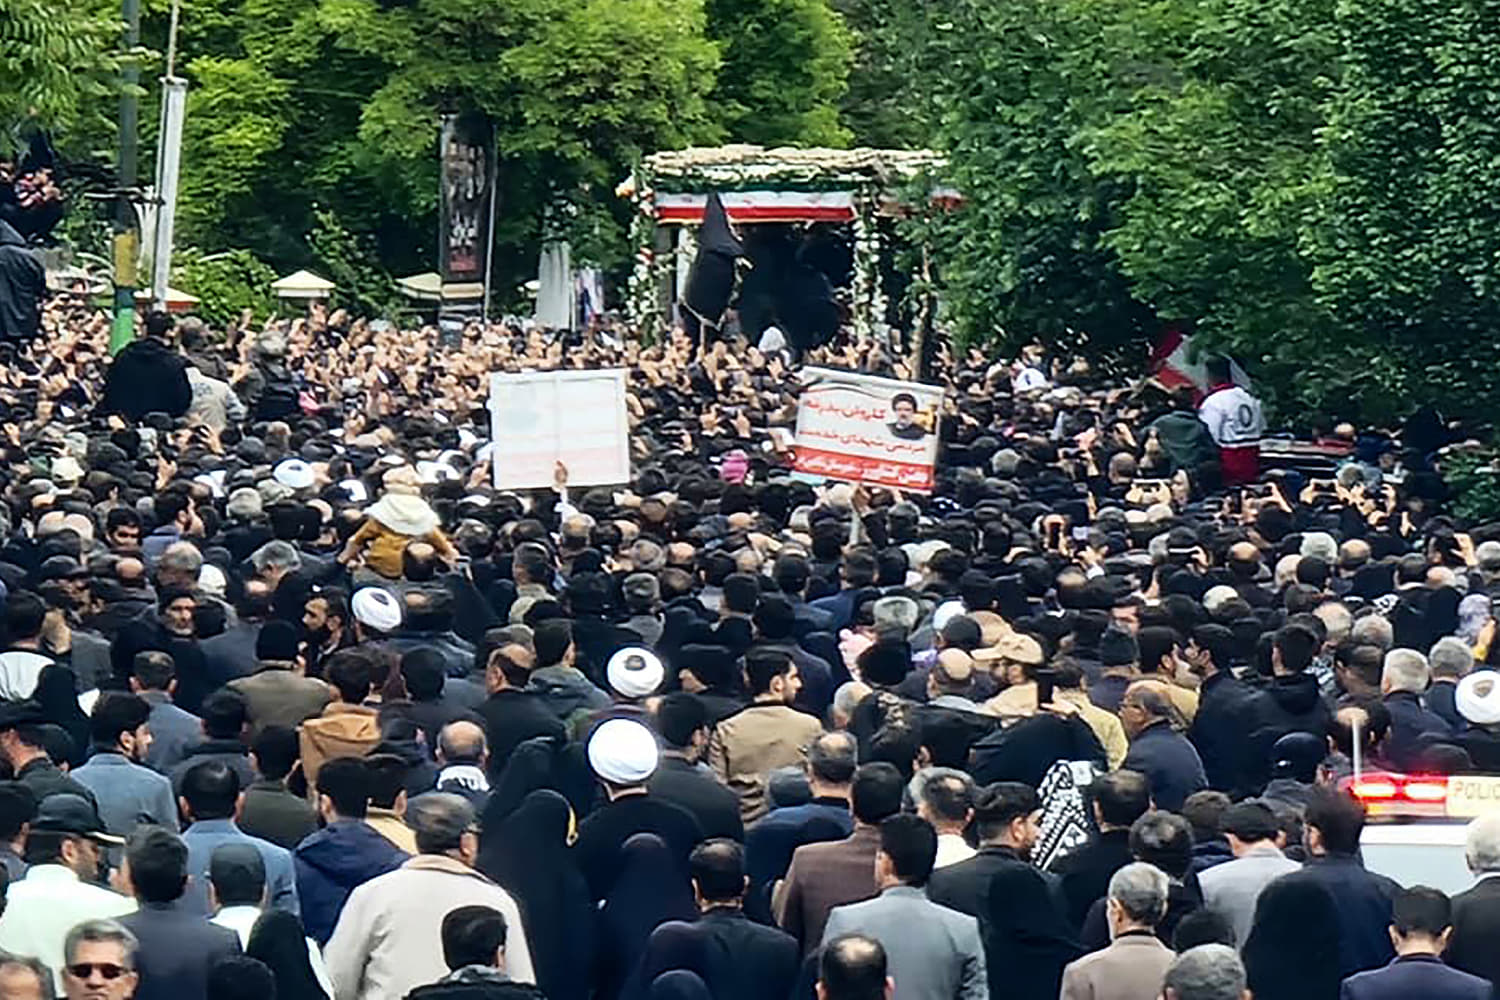 Iran begins days of funerals for President Raisi as helicopter crash fuels uncertainty